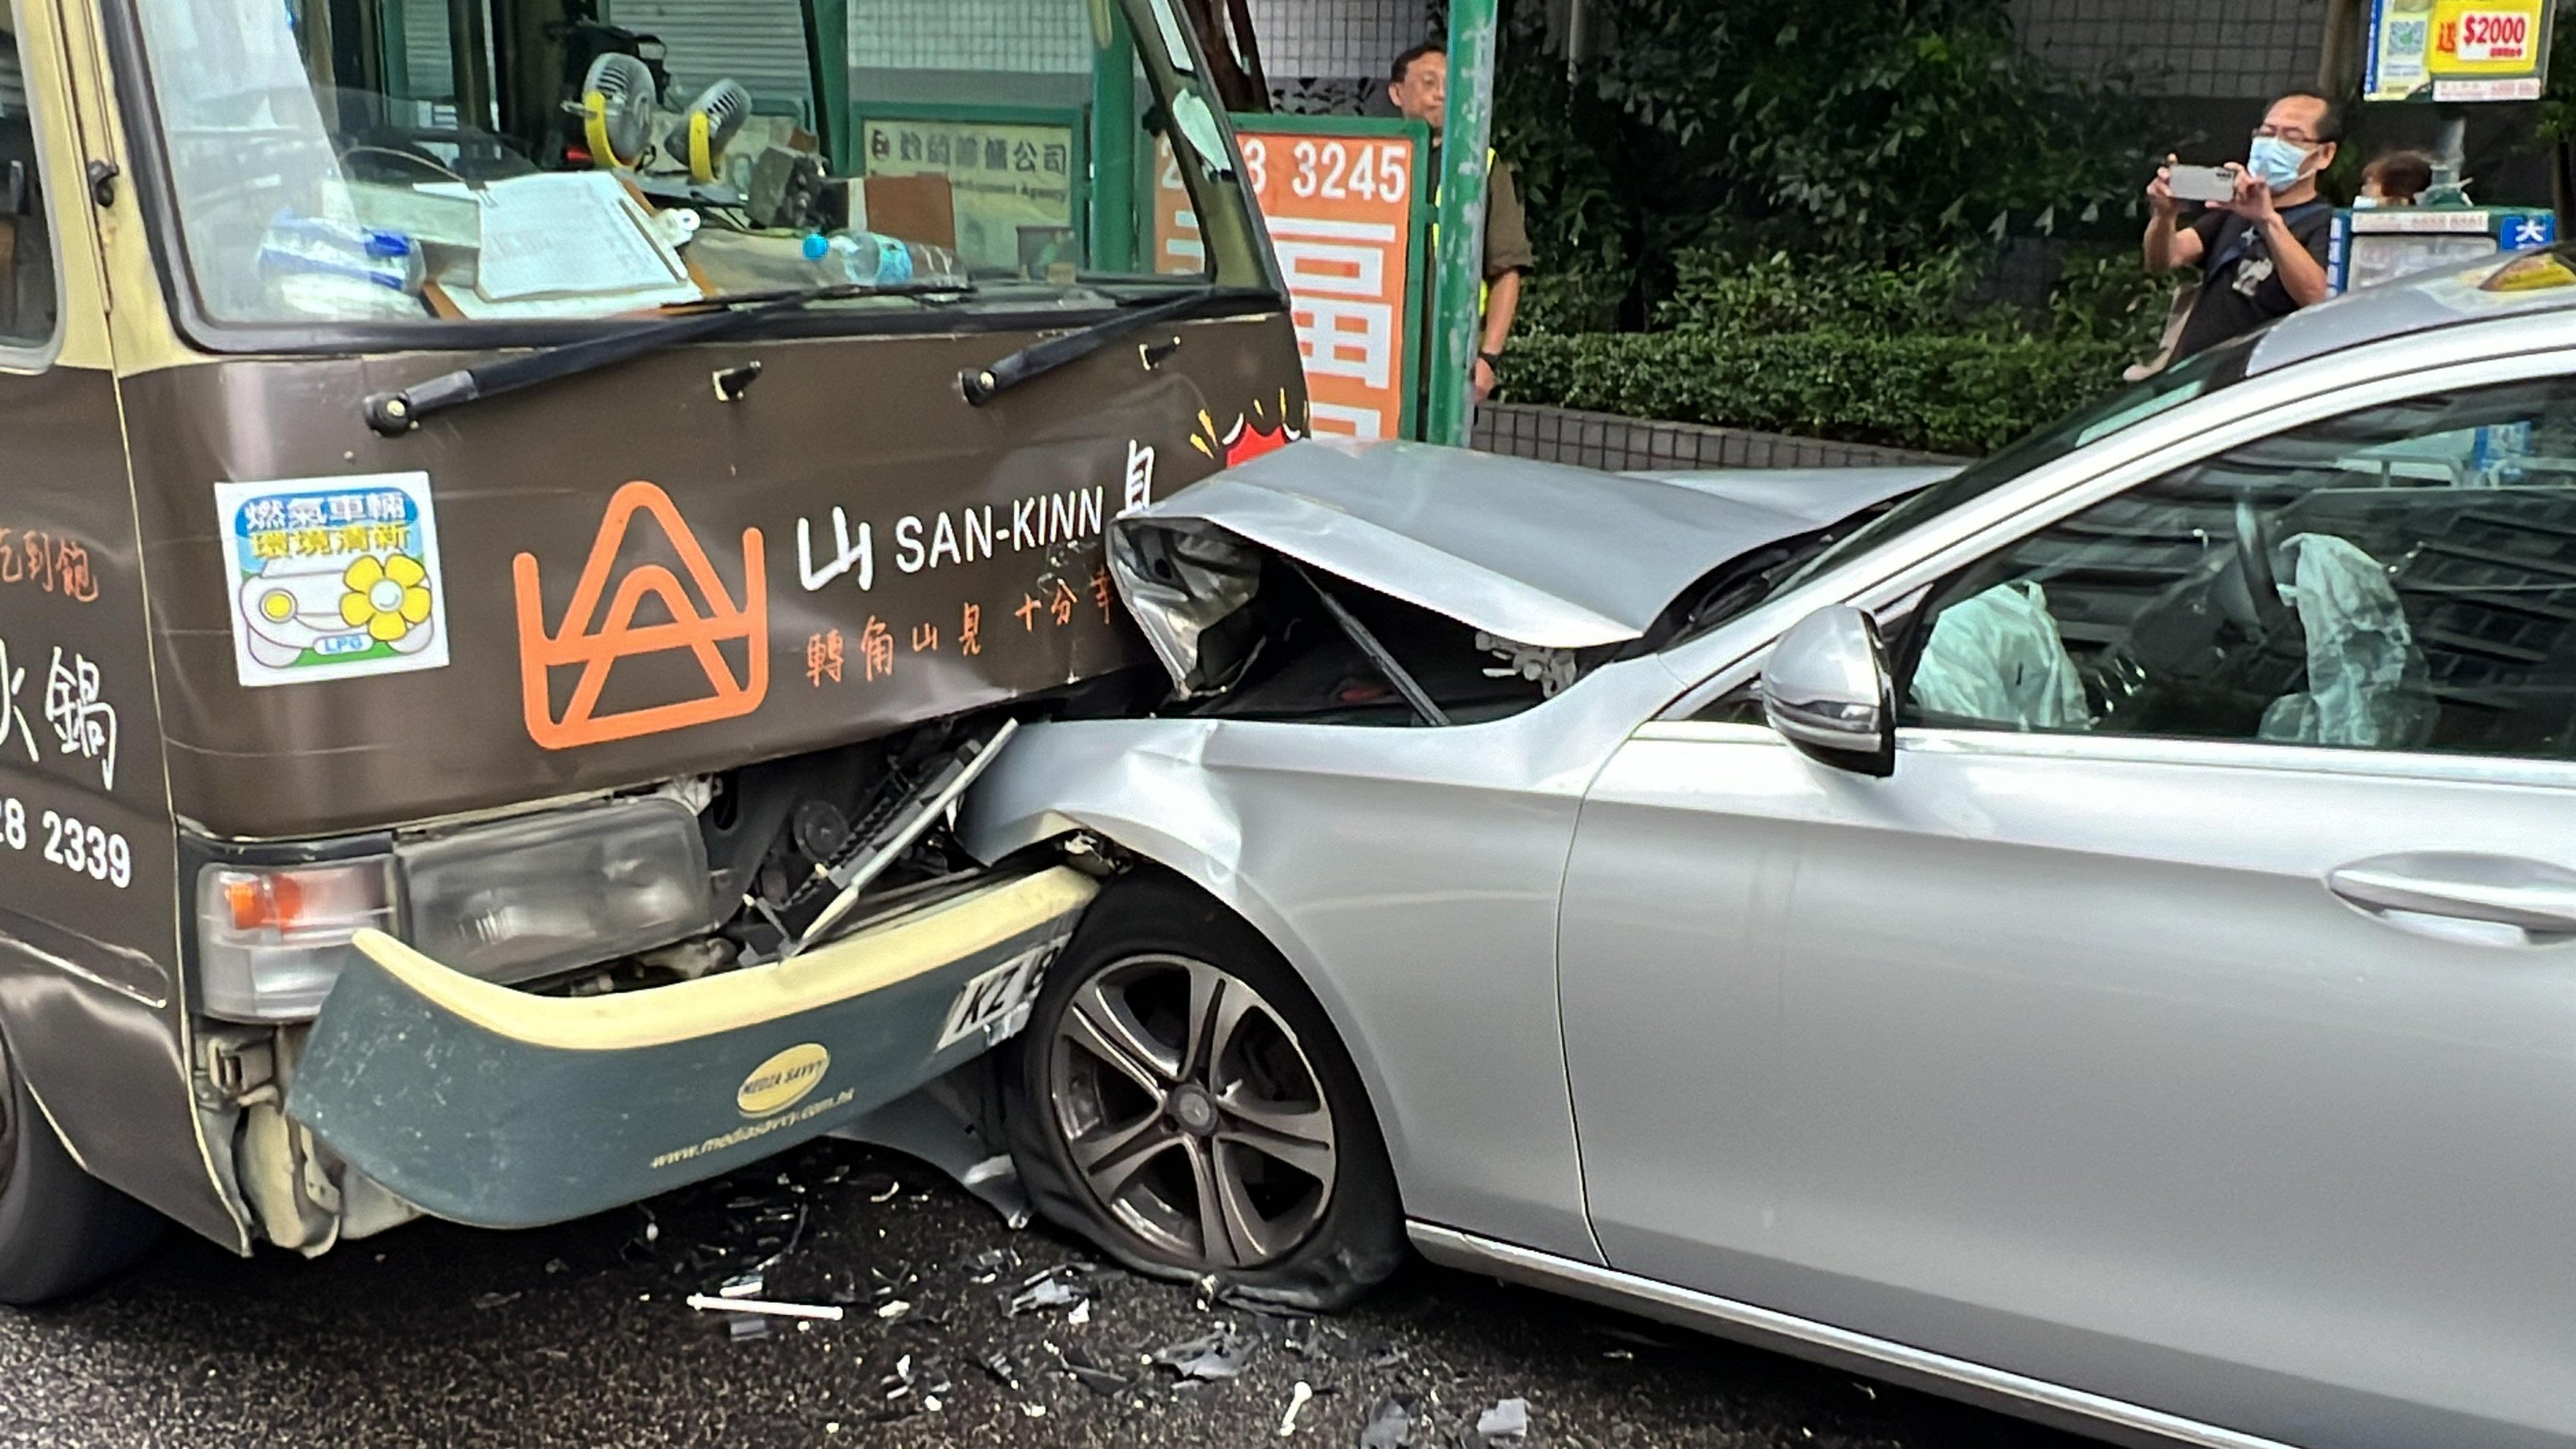 The front of the Mercedes-Benz was seriously damaged in the incident. Photo: Handout